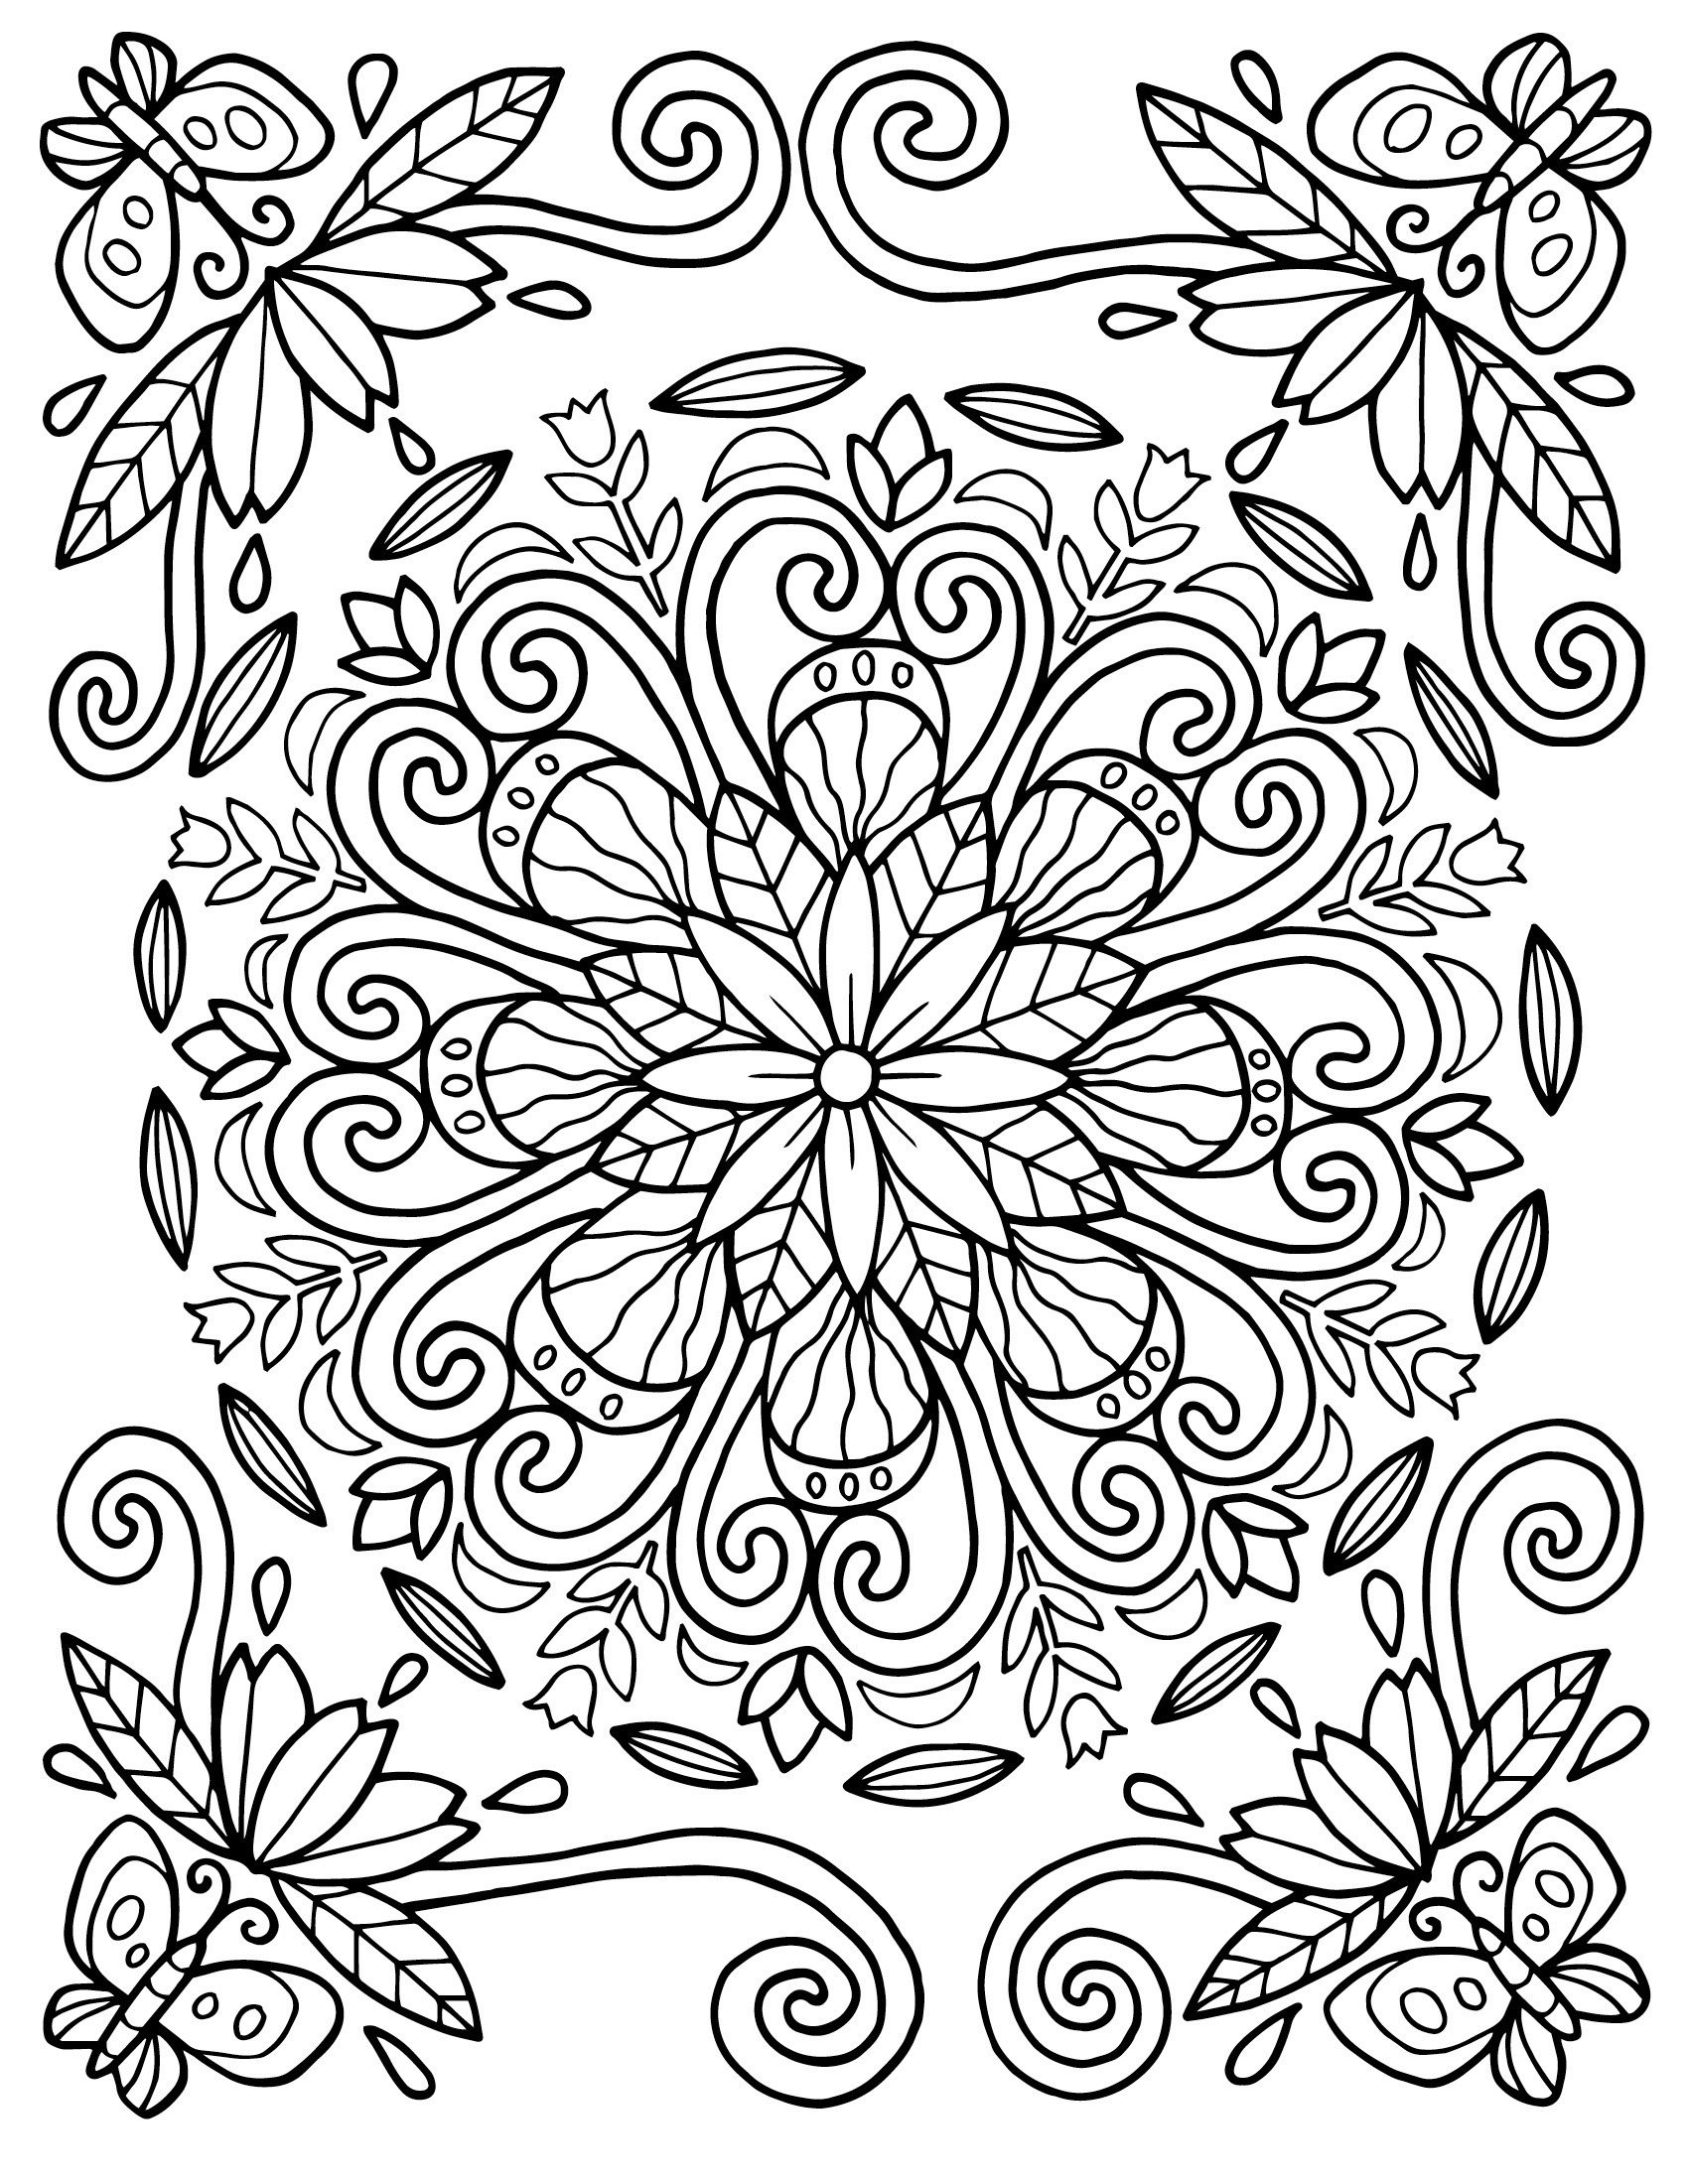 Design Patterns Coloring Pages